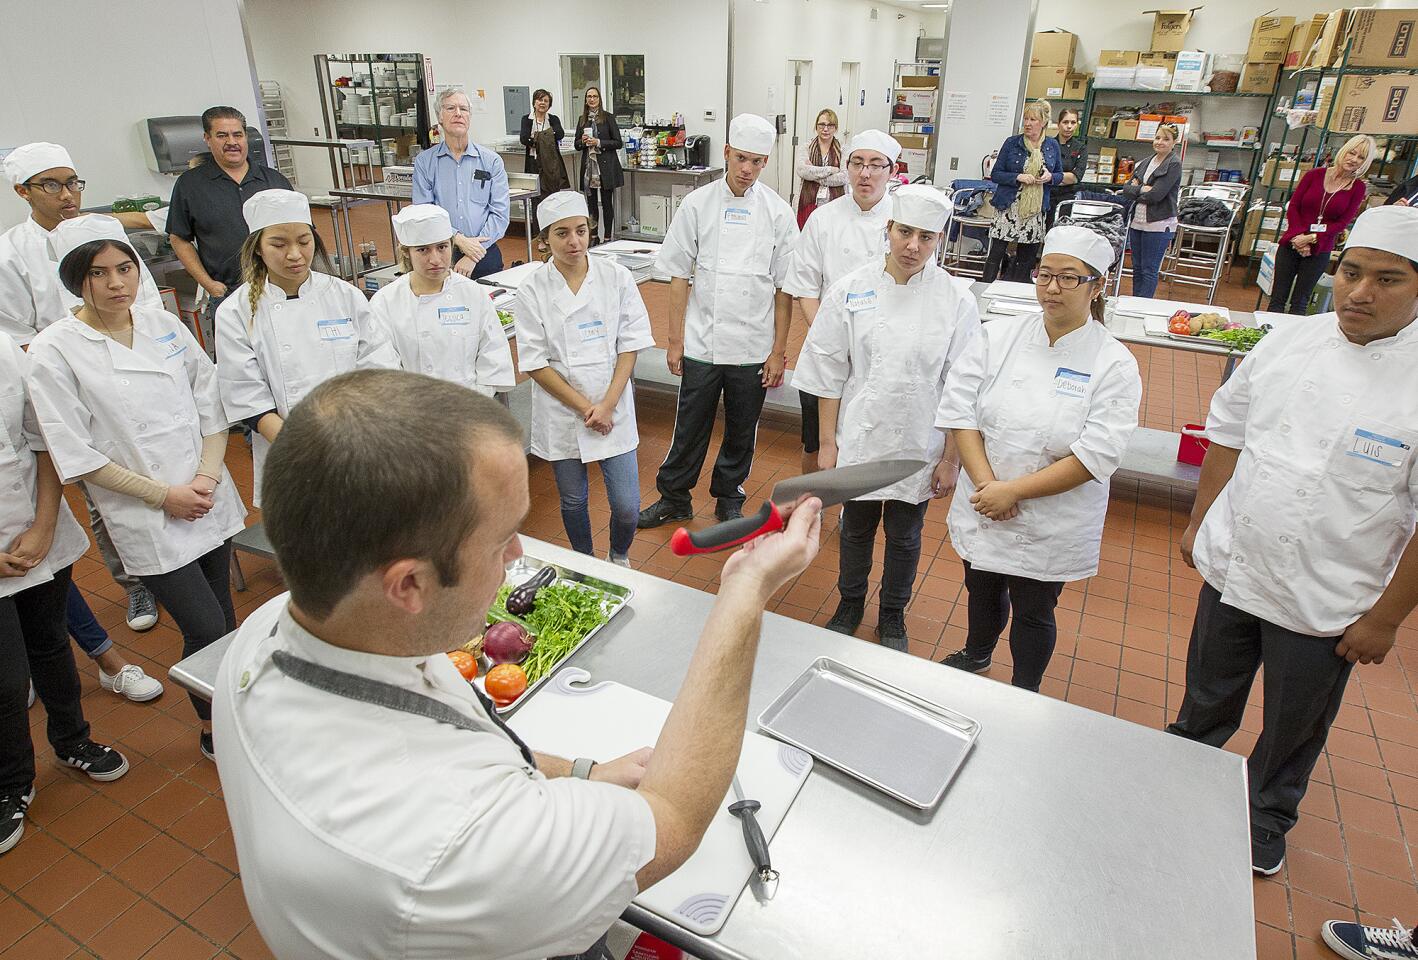 New culinary school at the OC Fair & Event Center